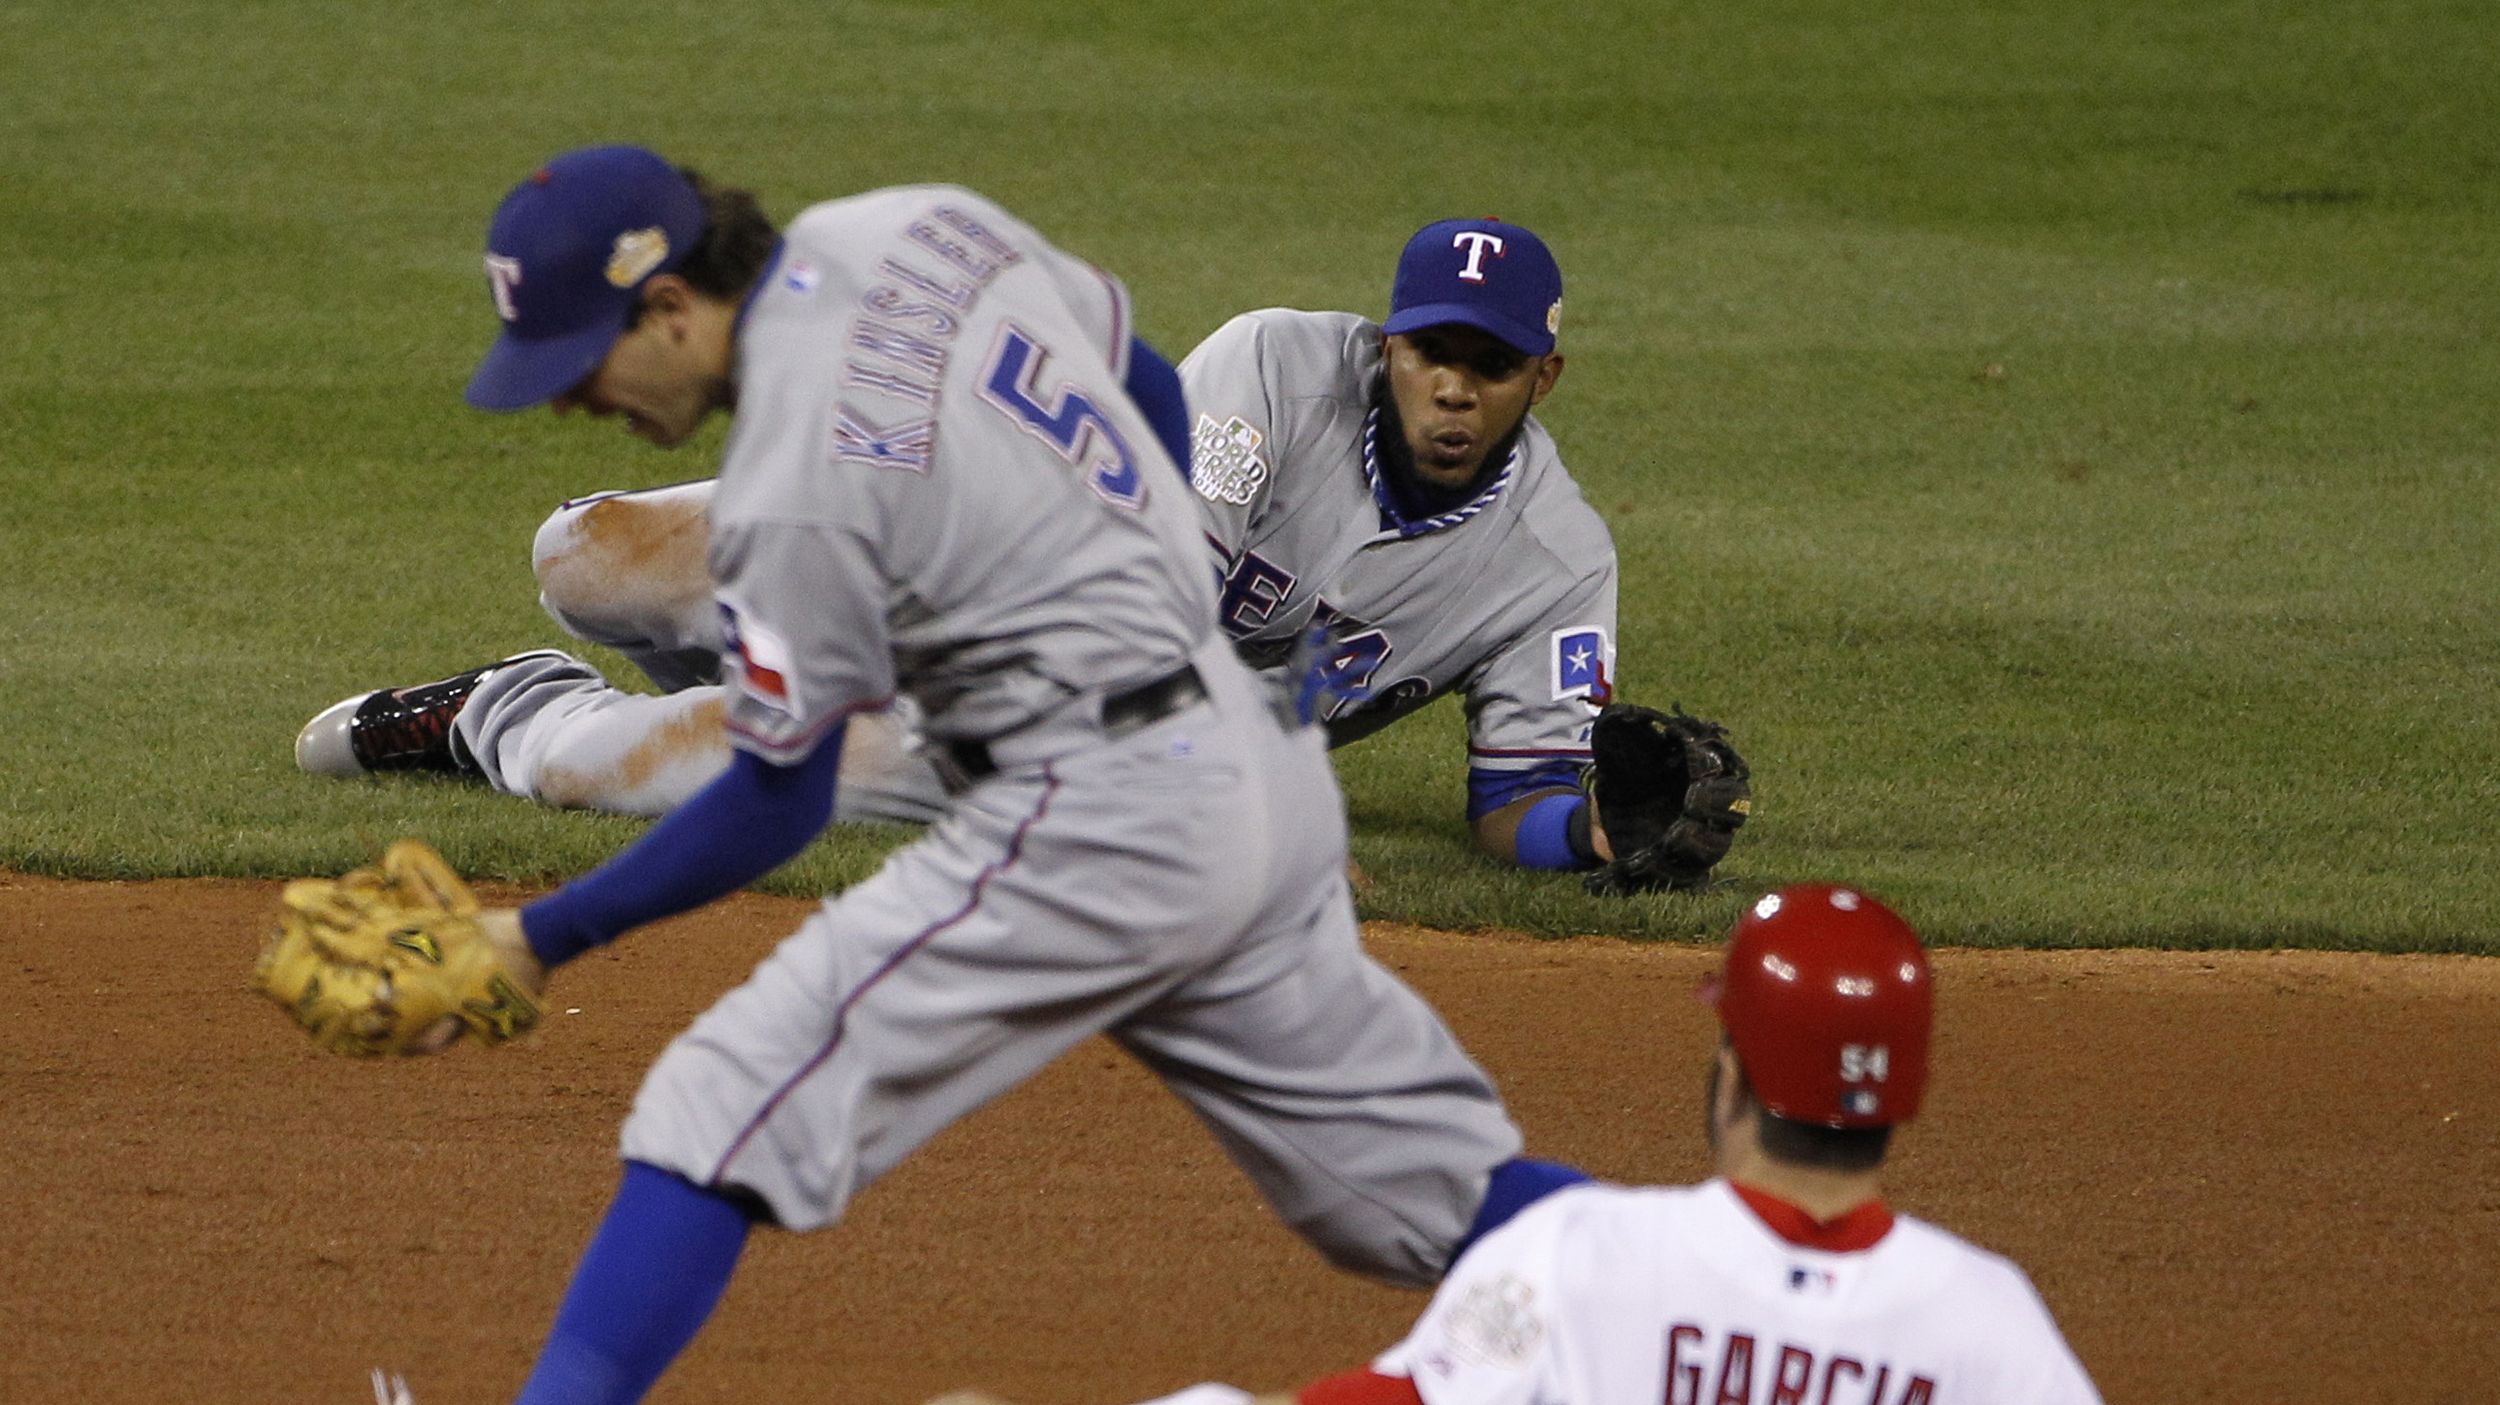 Texas Rangers shortstop Elvis Andrus, left, gets a word from Texas